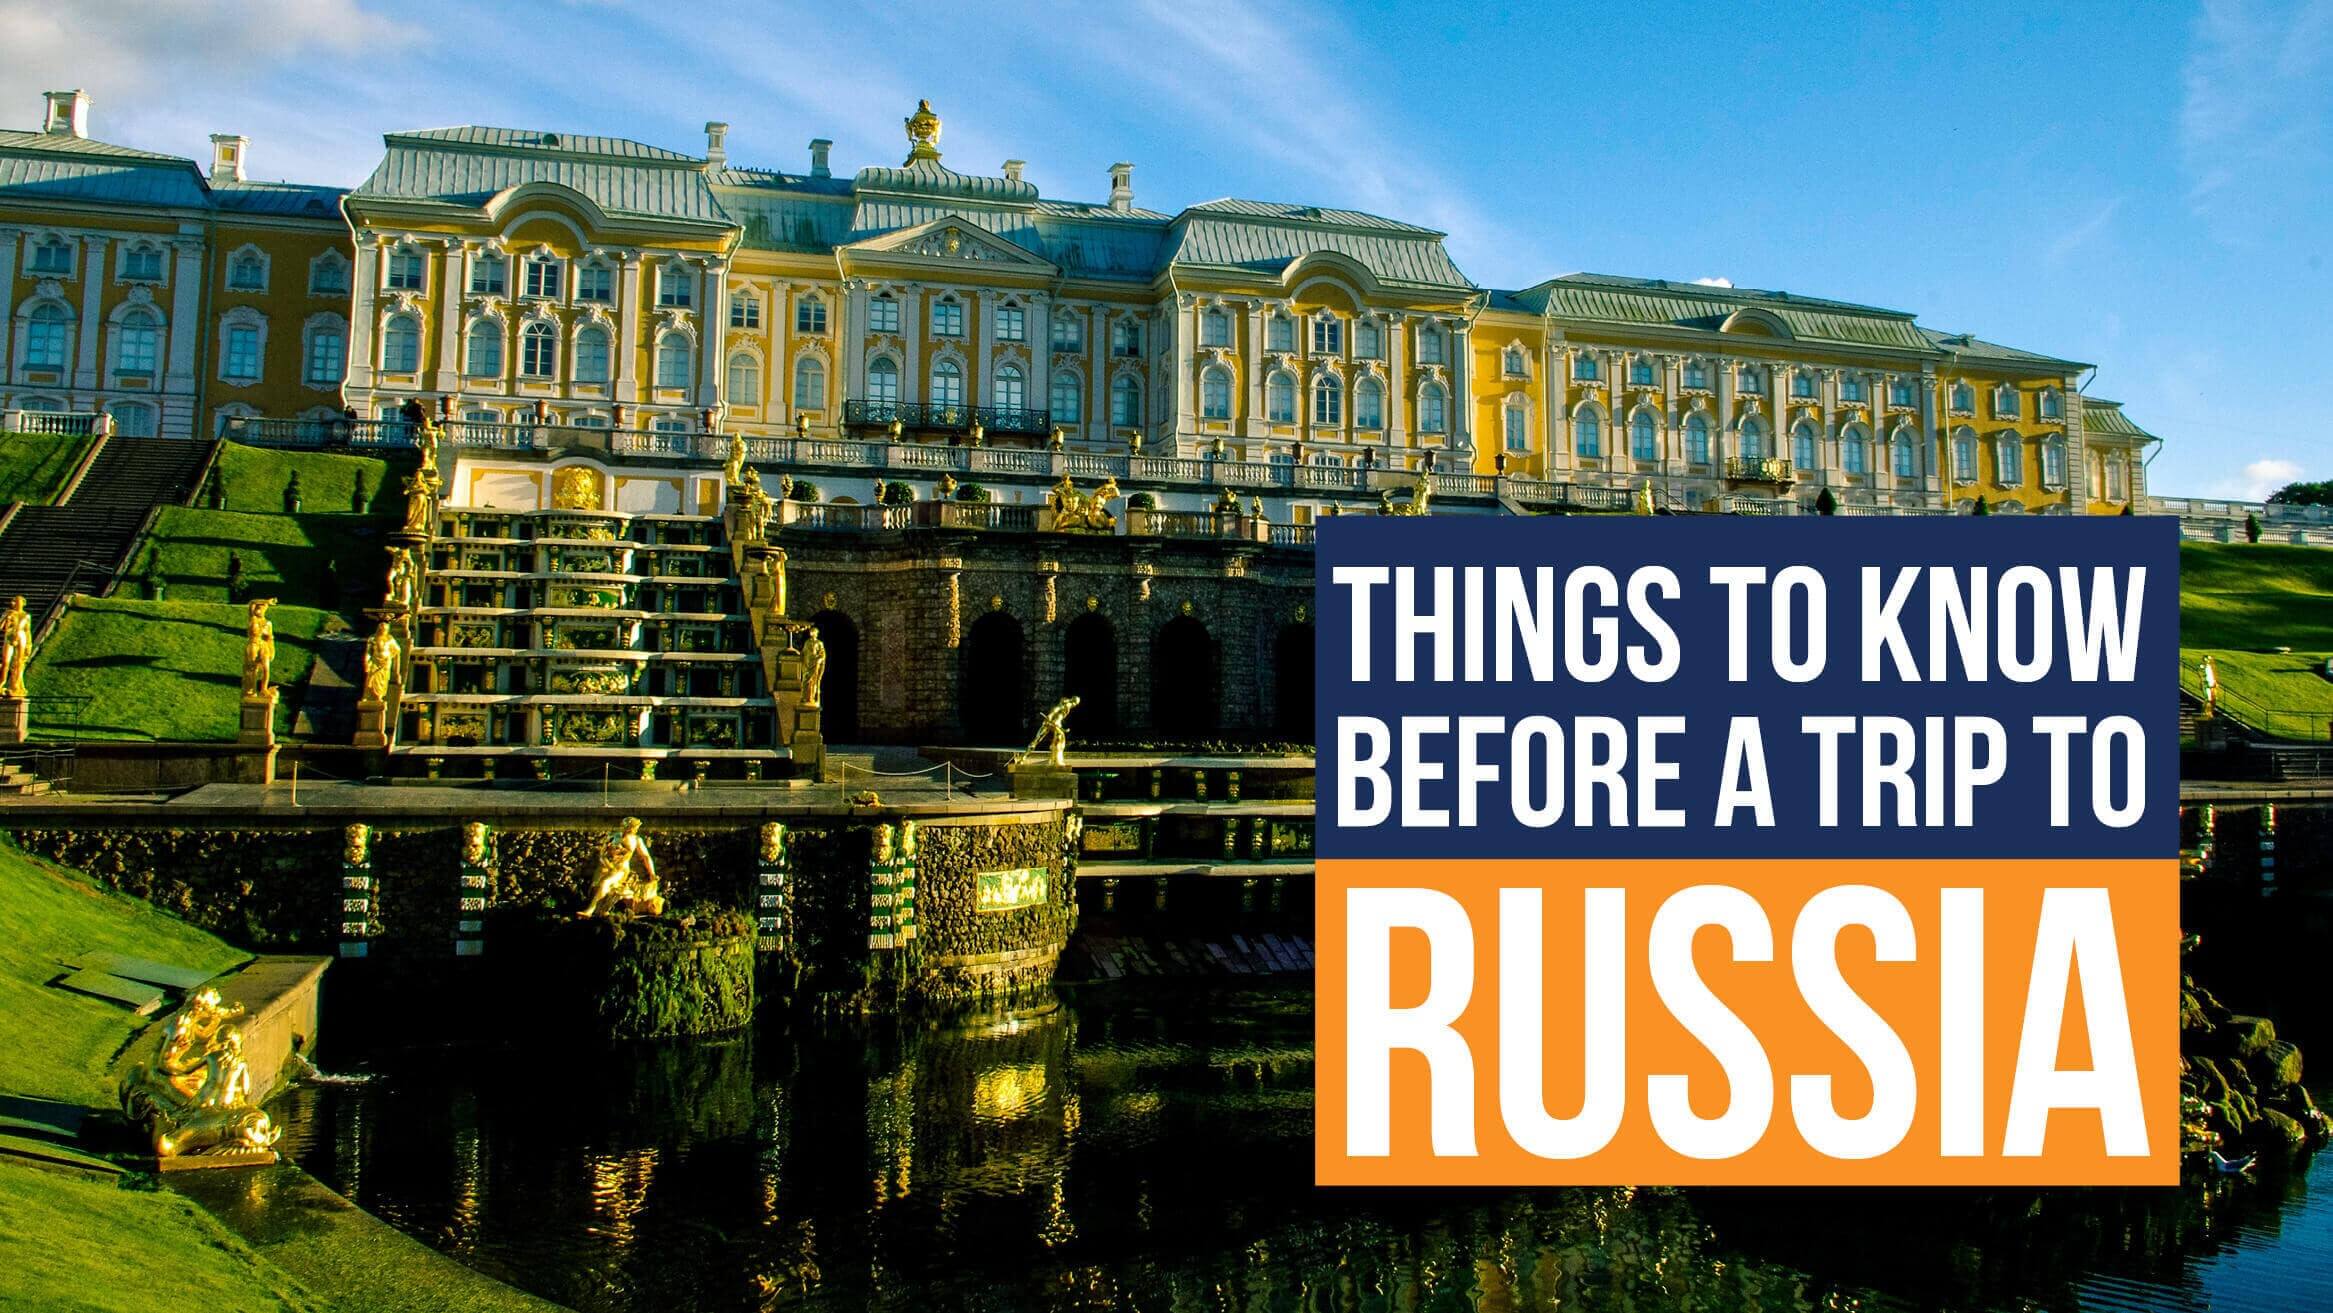 Things to know before a trip to Russia header